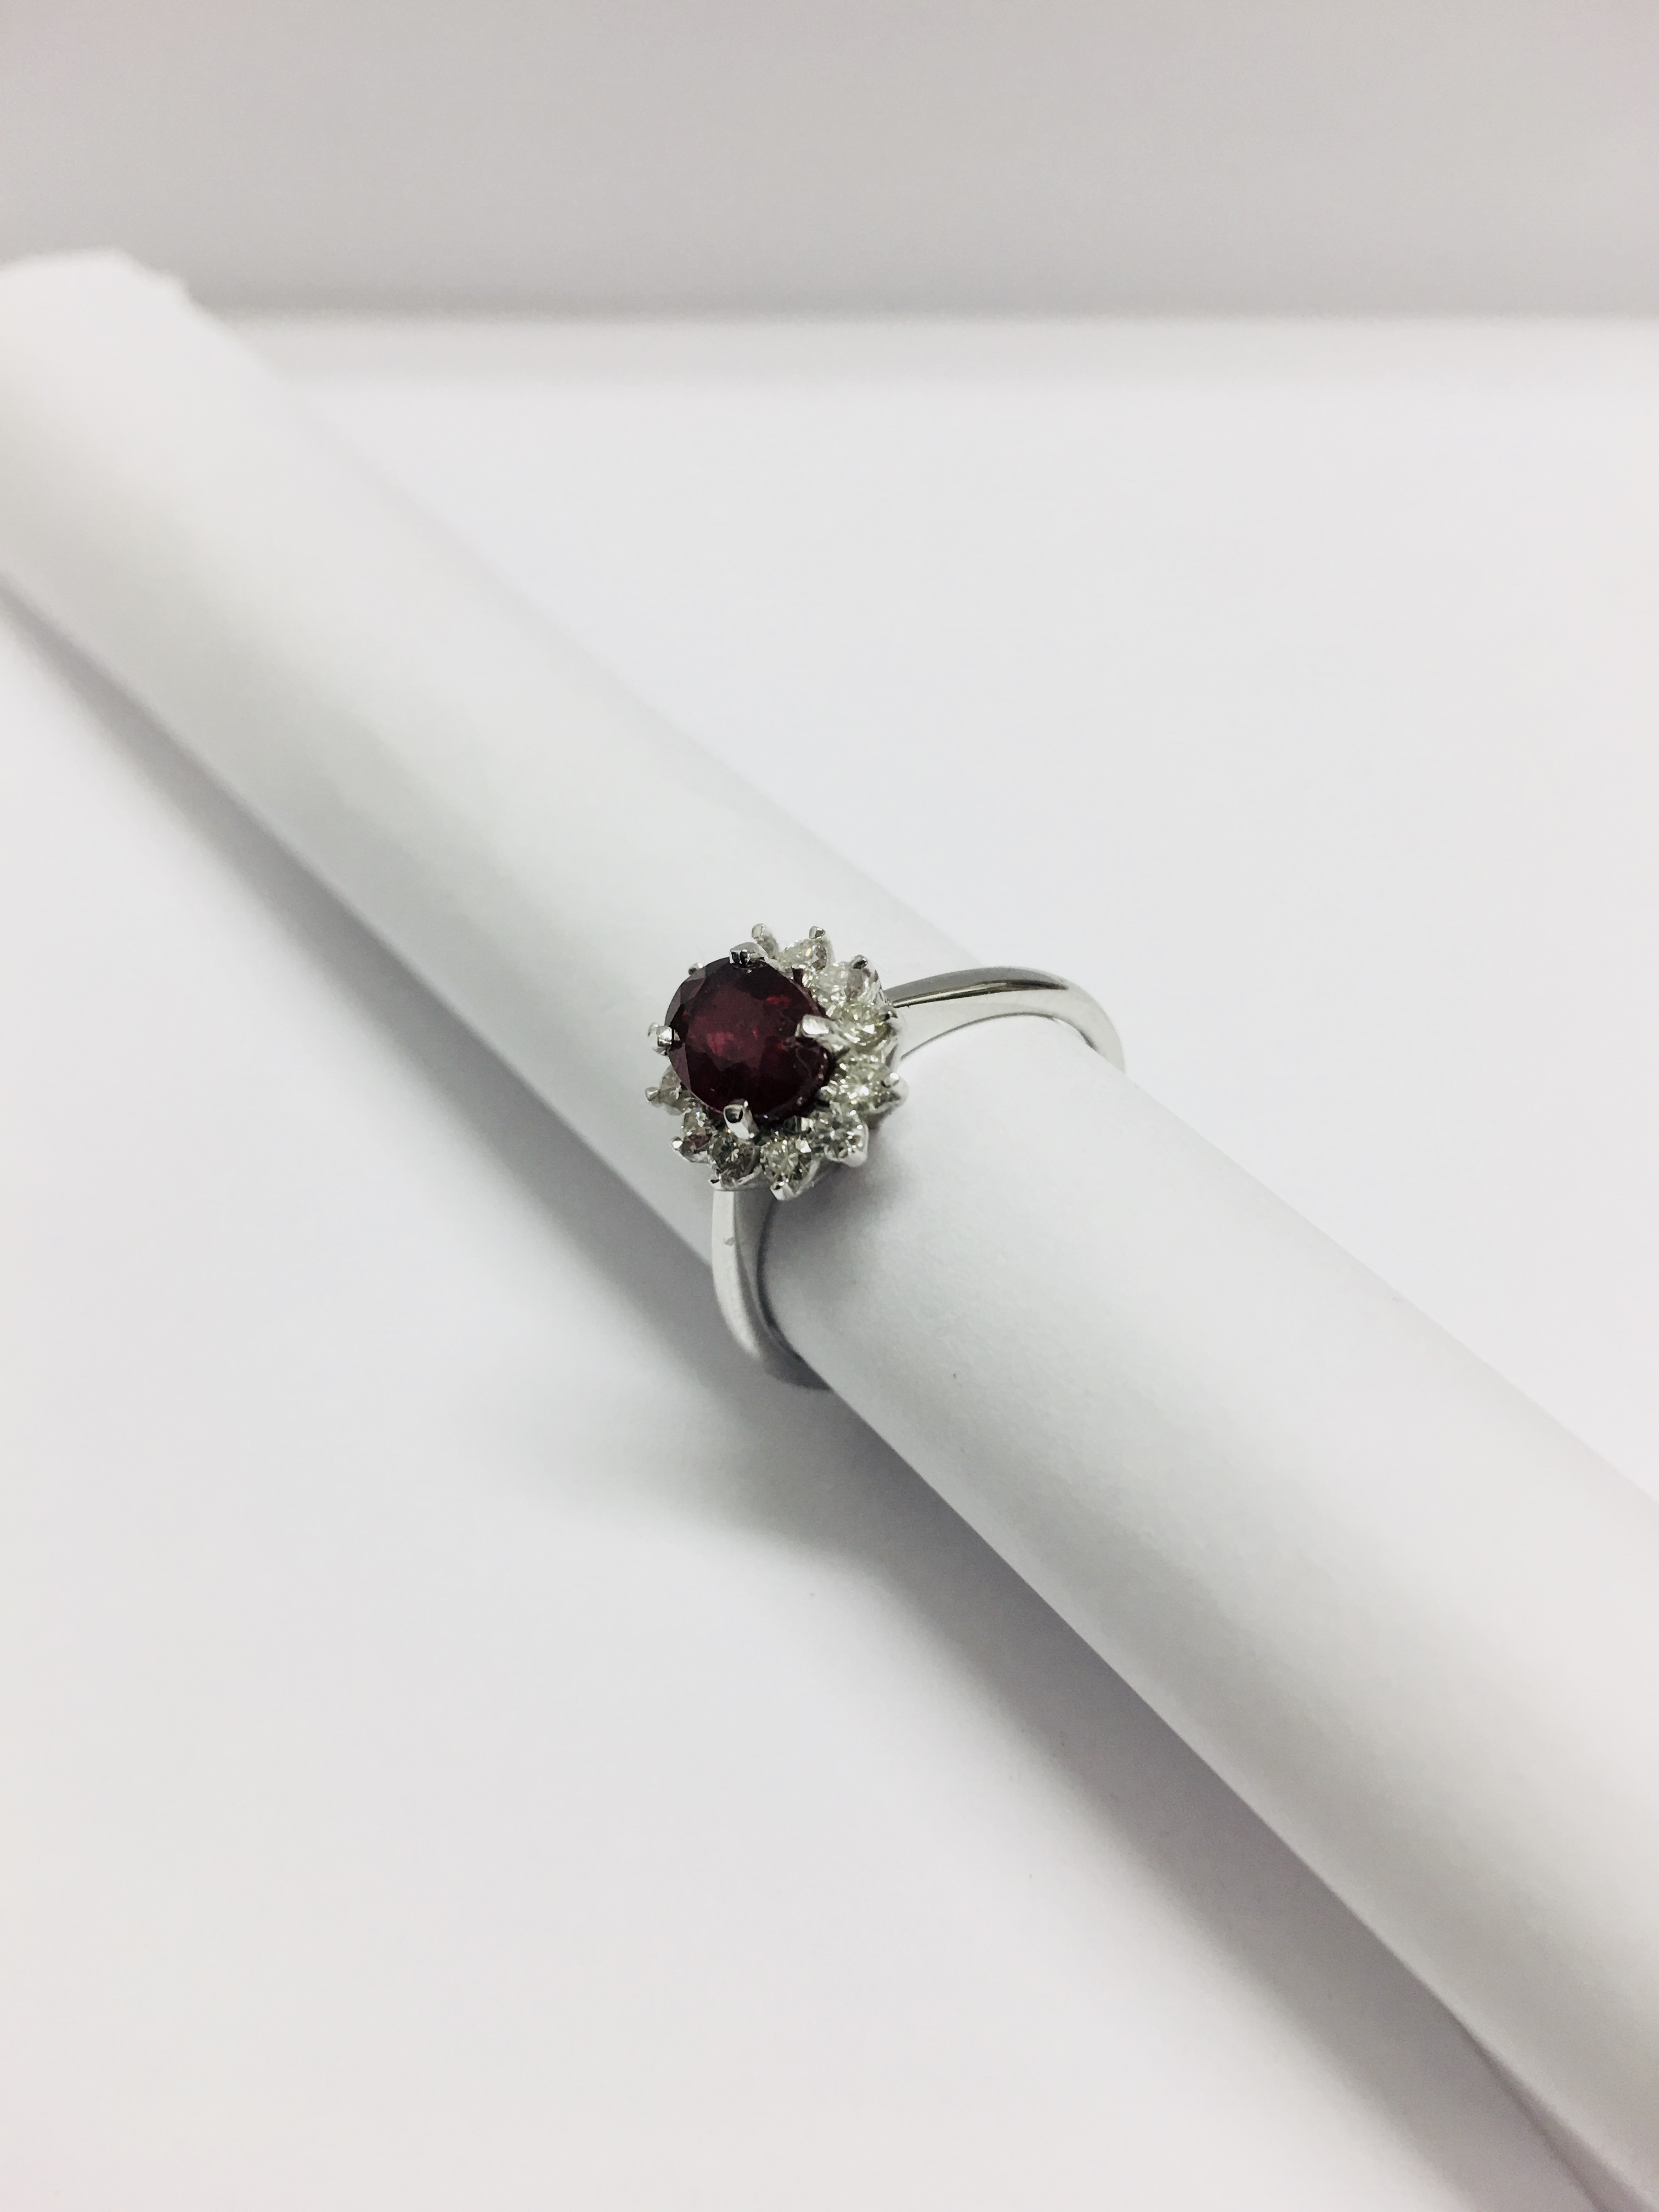 0.80Ct Ruby And Diamond Cluster Ring Set With A Oval Cut(Glass Filled) Ruby - Image 9 of 9